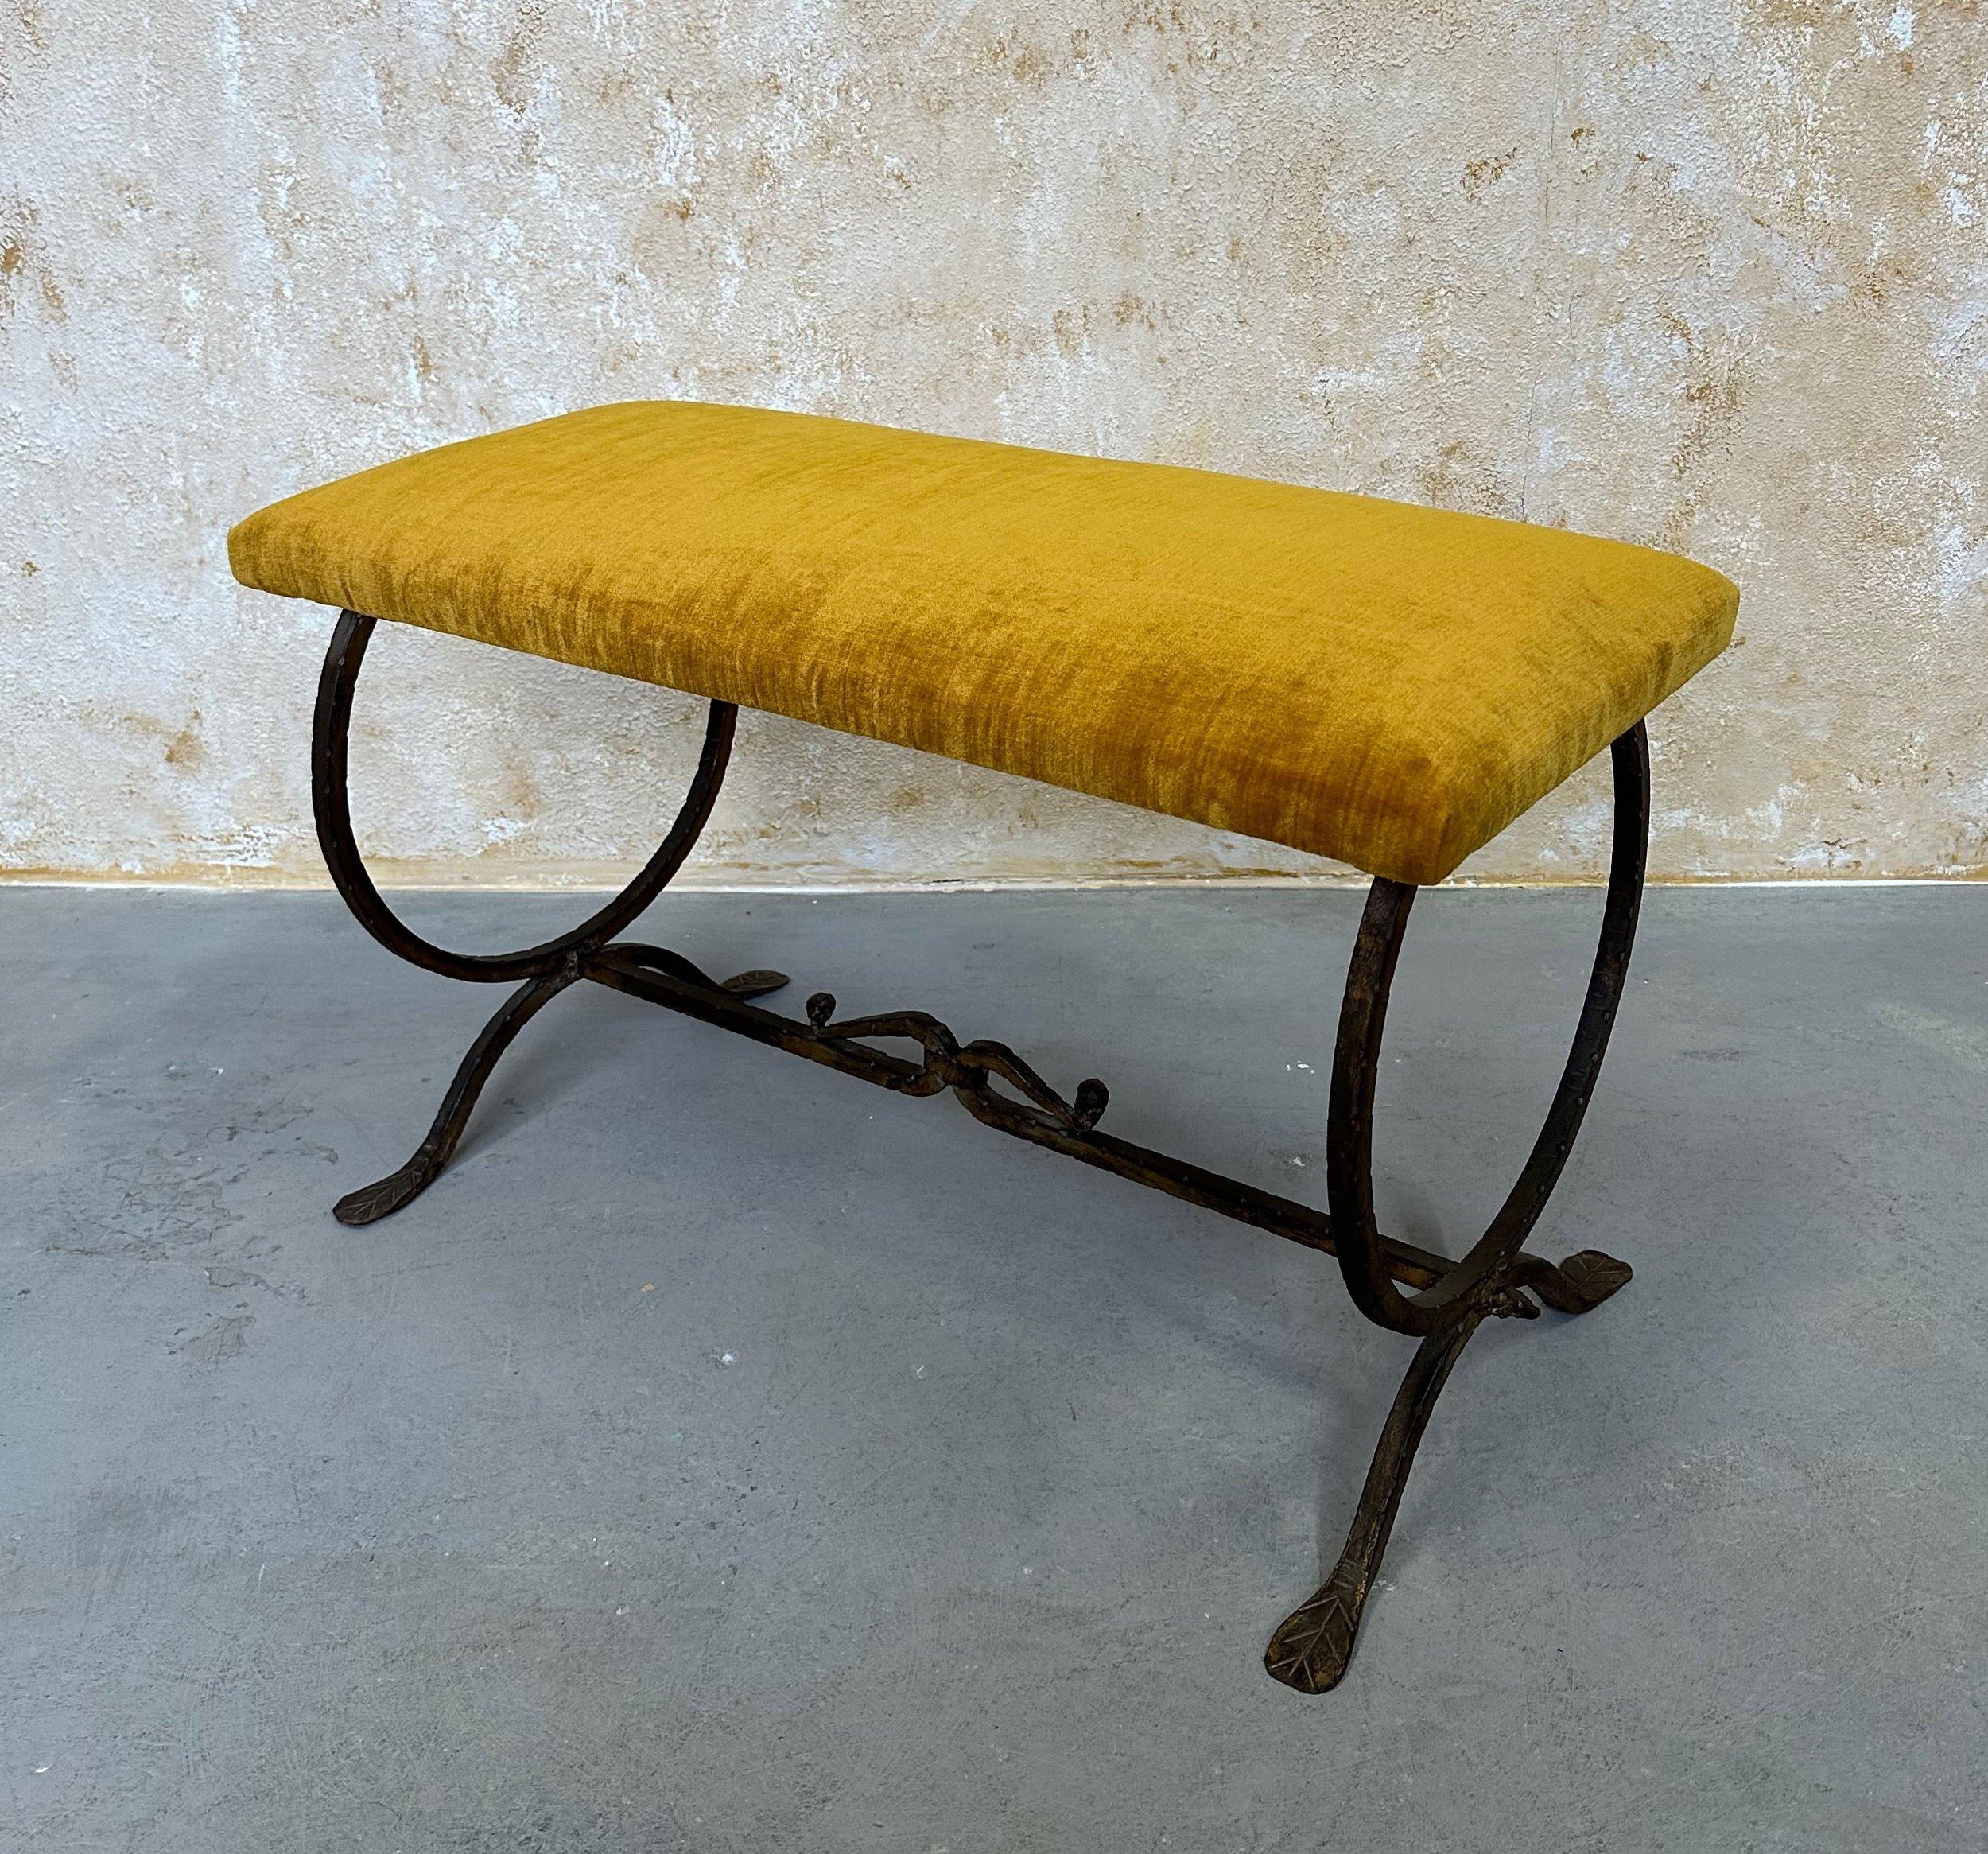 This lovely 1950s Spanish handwrought iron bench features an hourglass frame with a stretcher that has a central curled decorative detail and comes to a point at the ends. The frame is finished in a hand-applied dark gilt patina that contrasts the